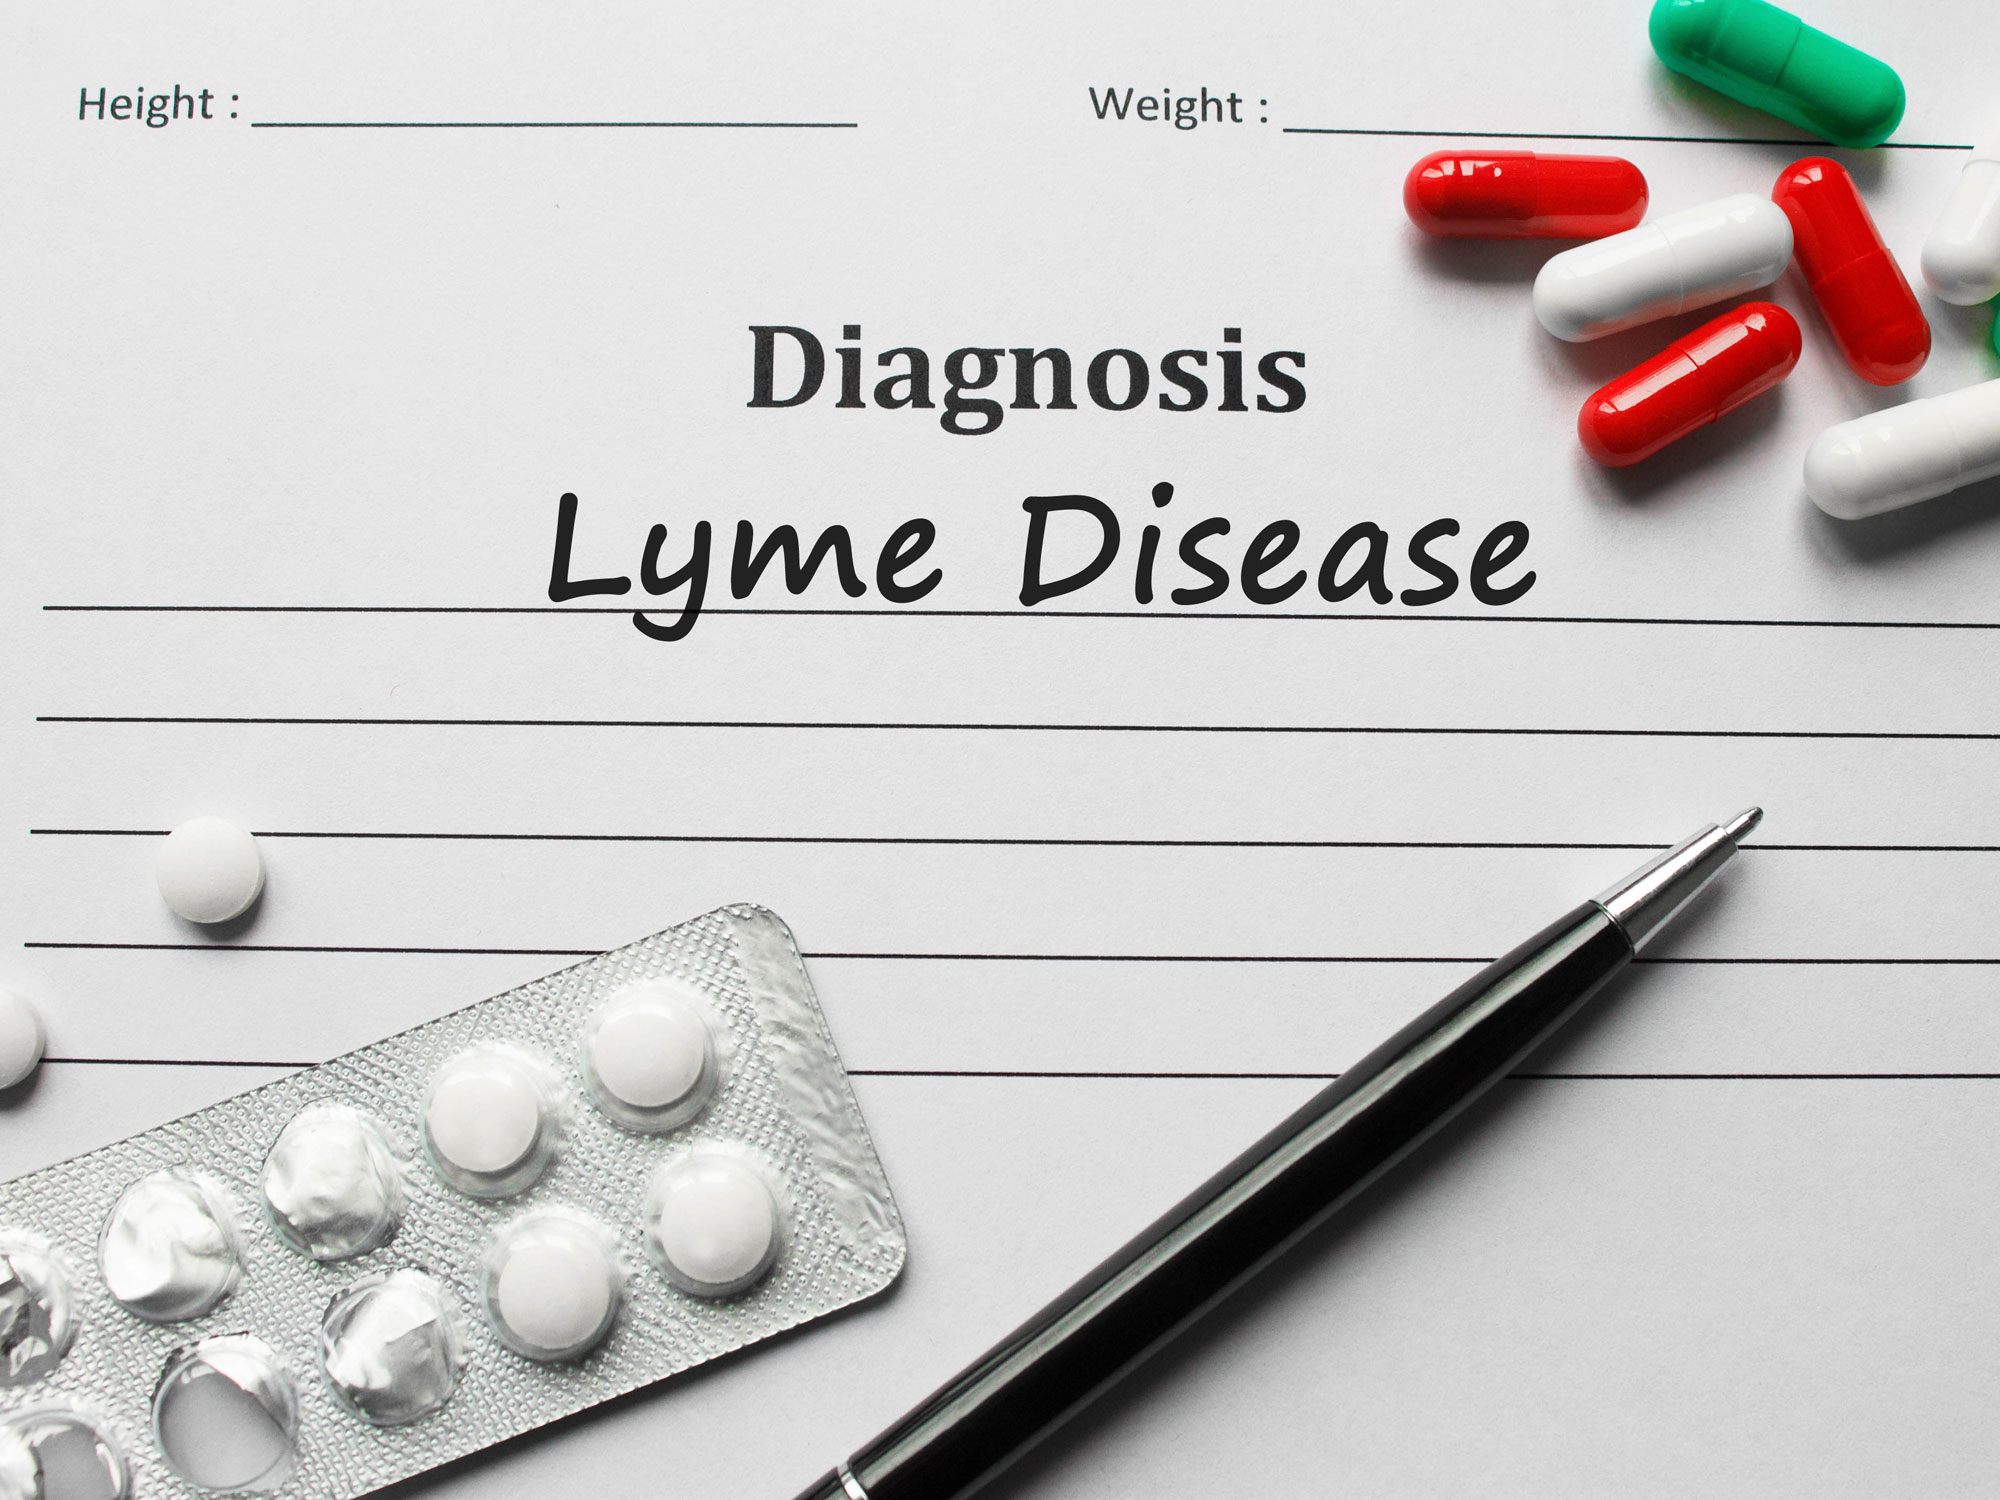 The case for chronic Lyme: Another antibiotic fail?